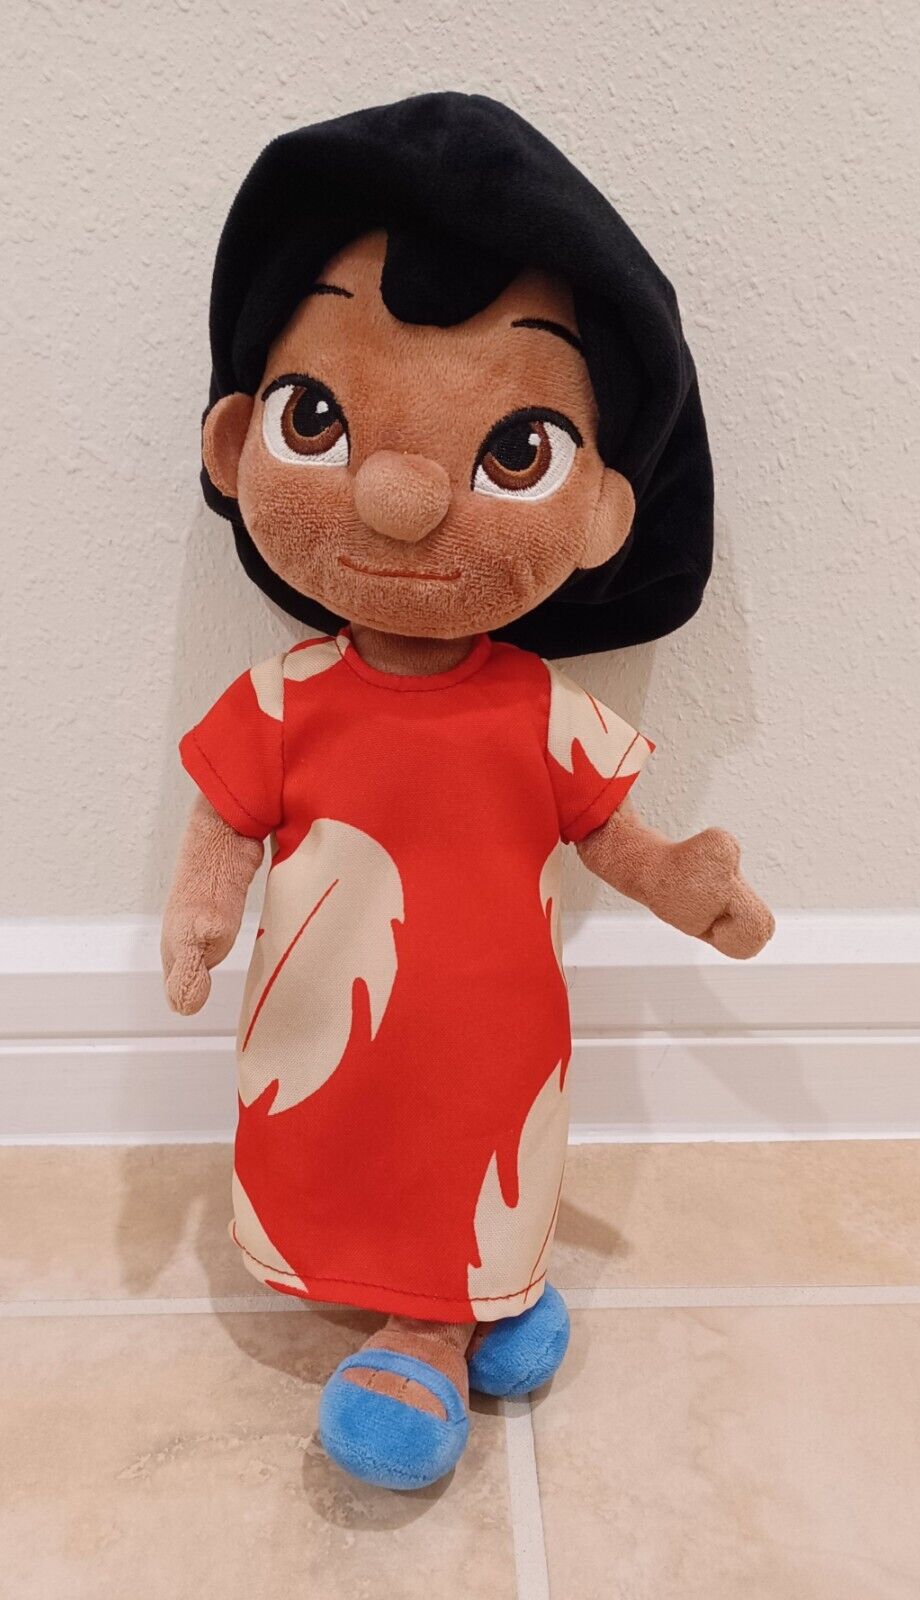 Disney Store Animators Collection LILO Plush Red Dress 12 Inch RED